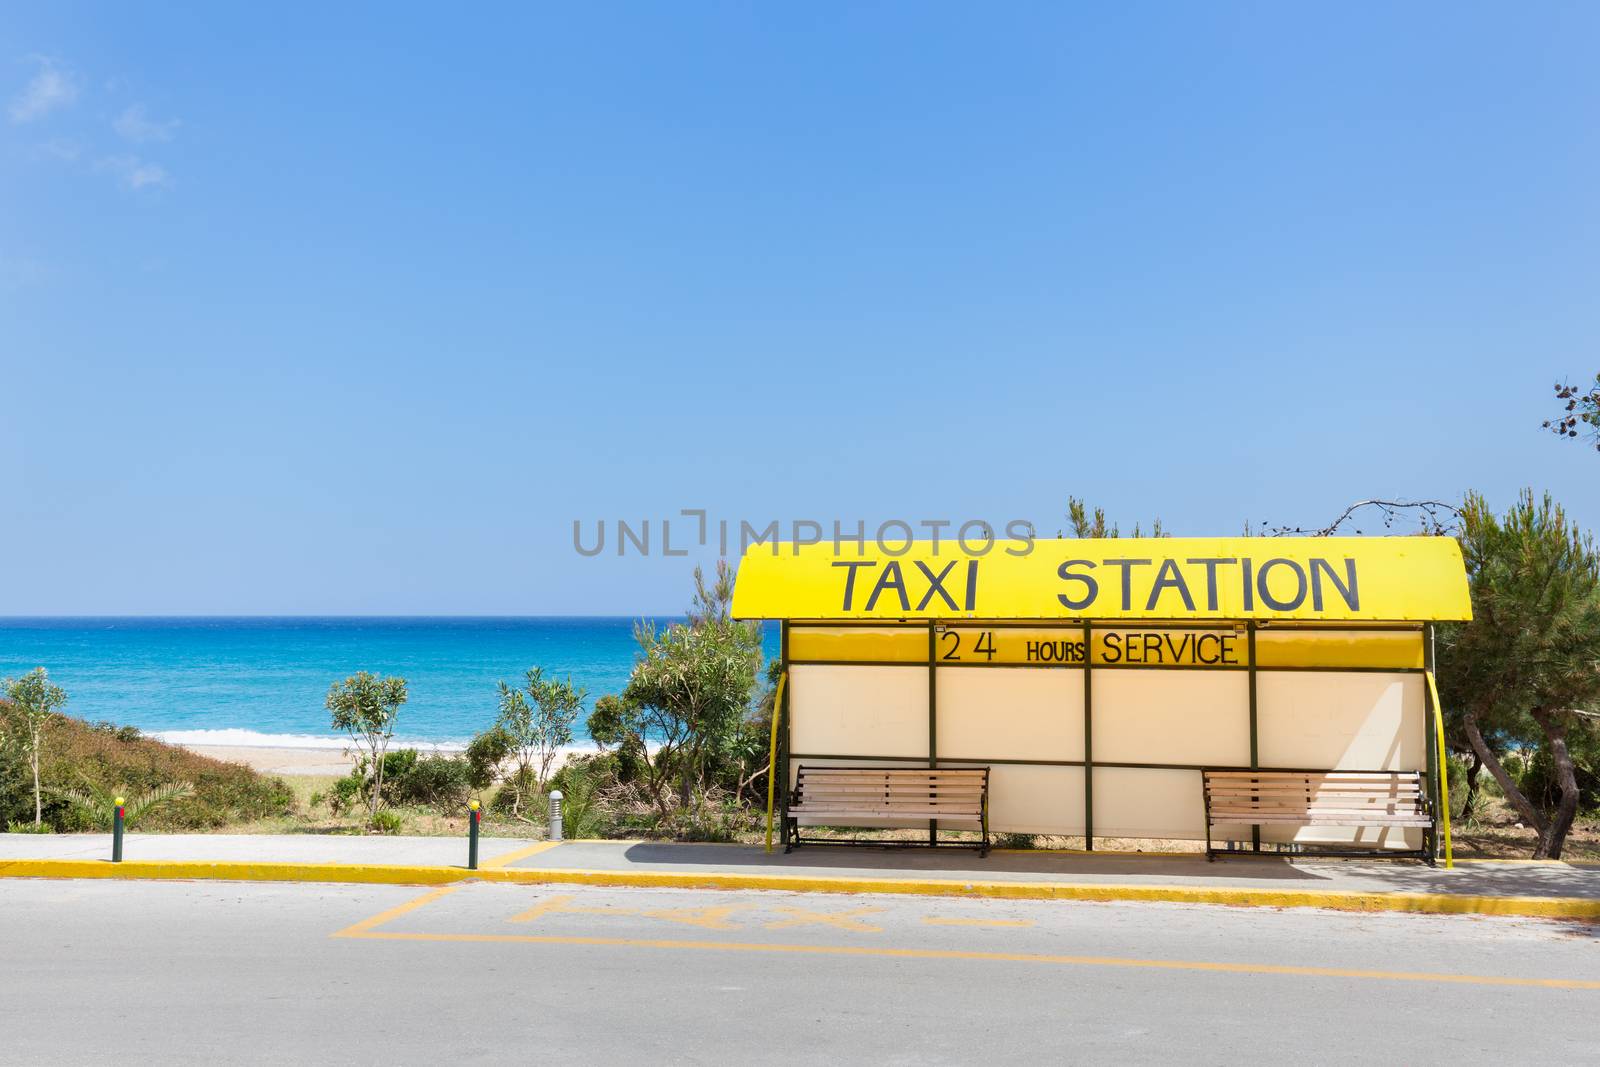 Taxi station near beach and sea in Greece by BenSchonewille